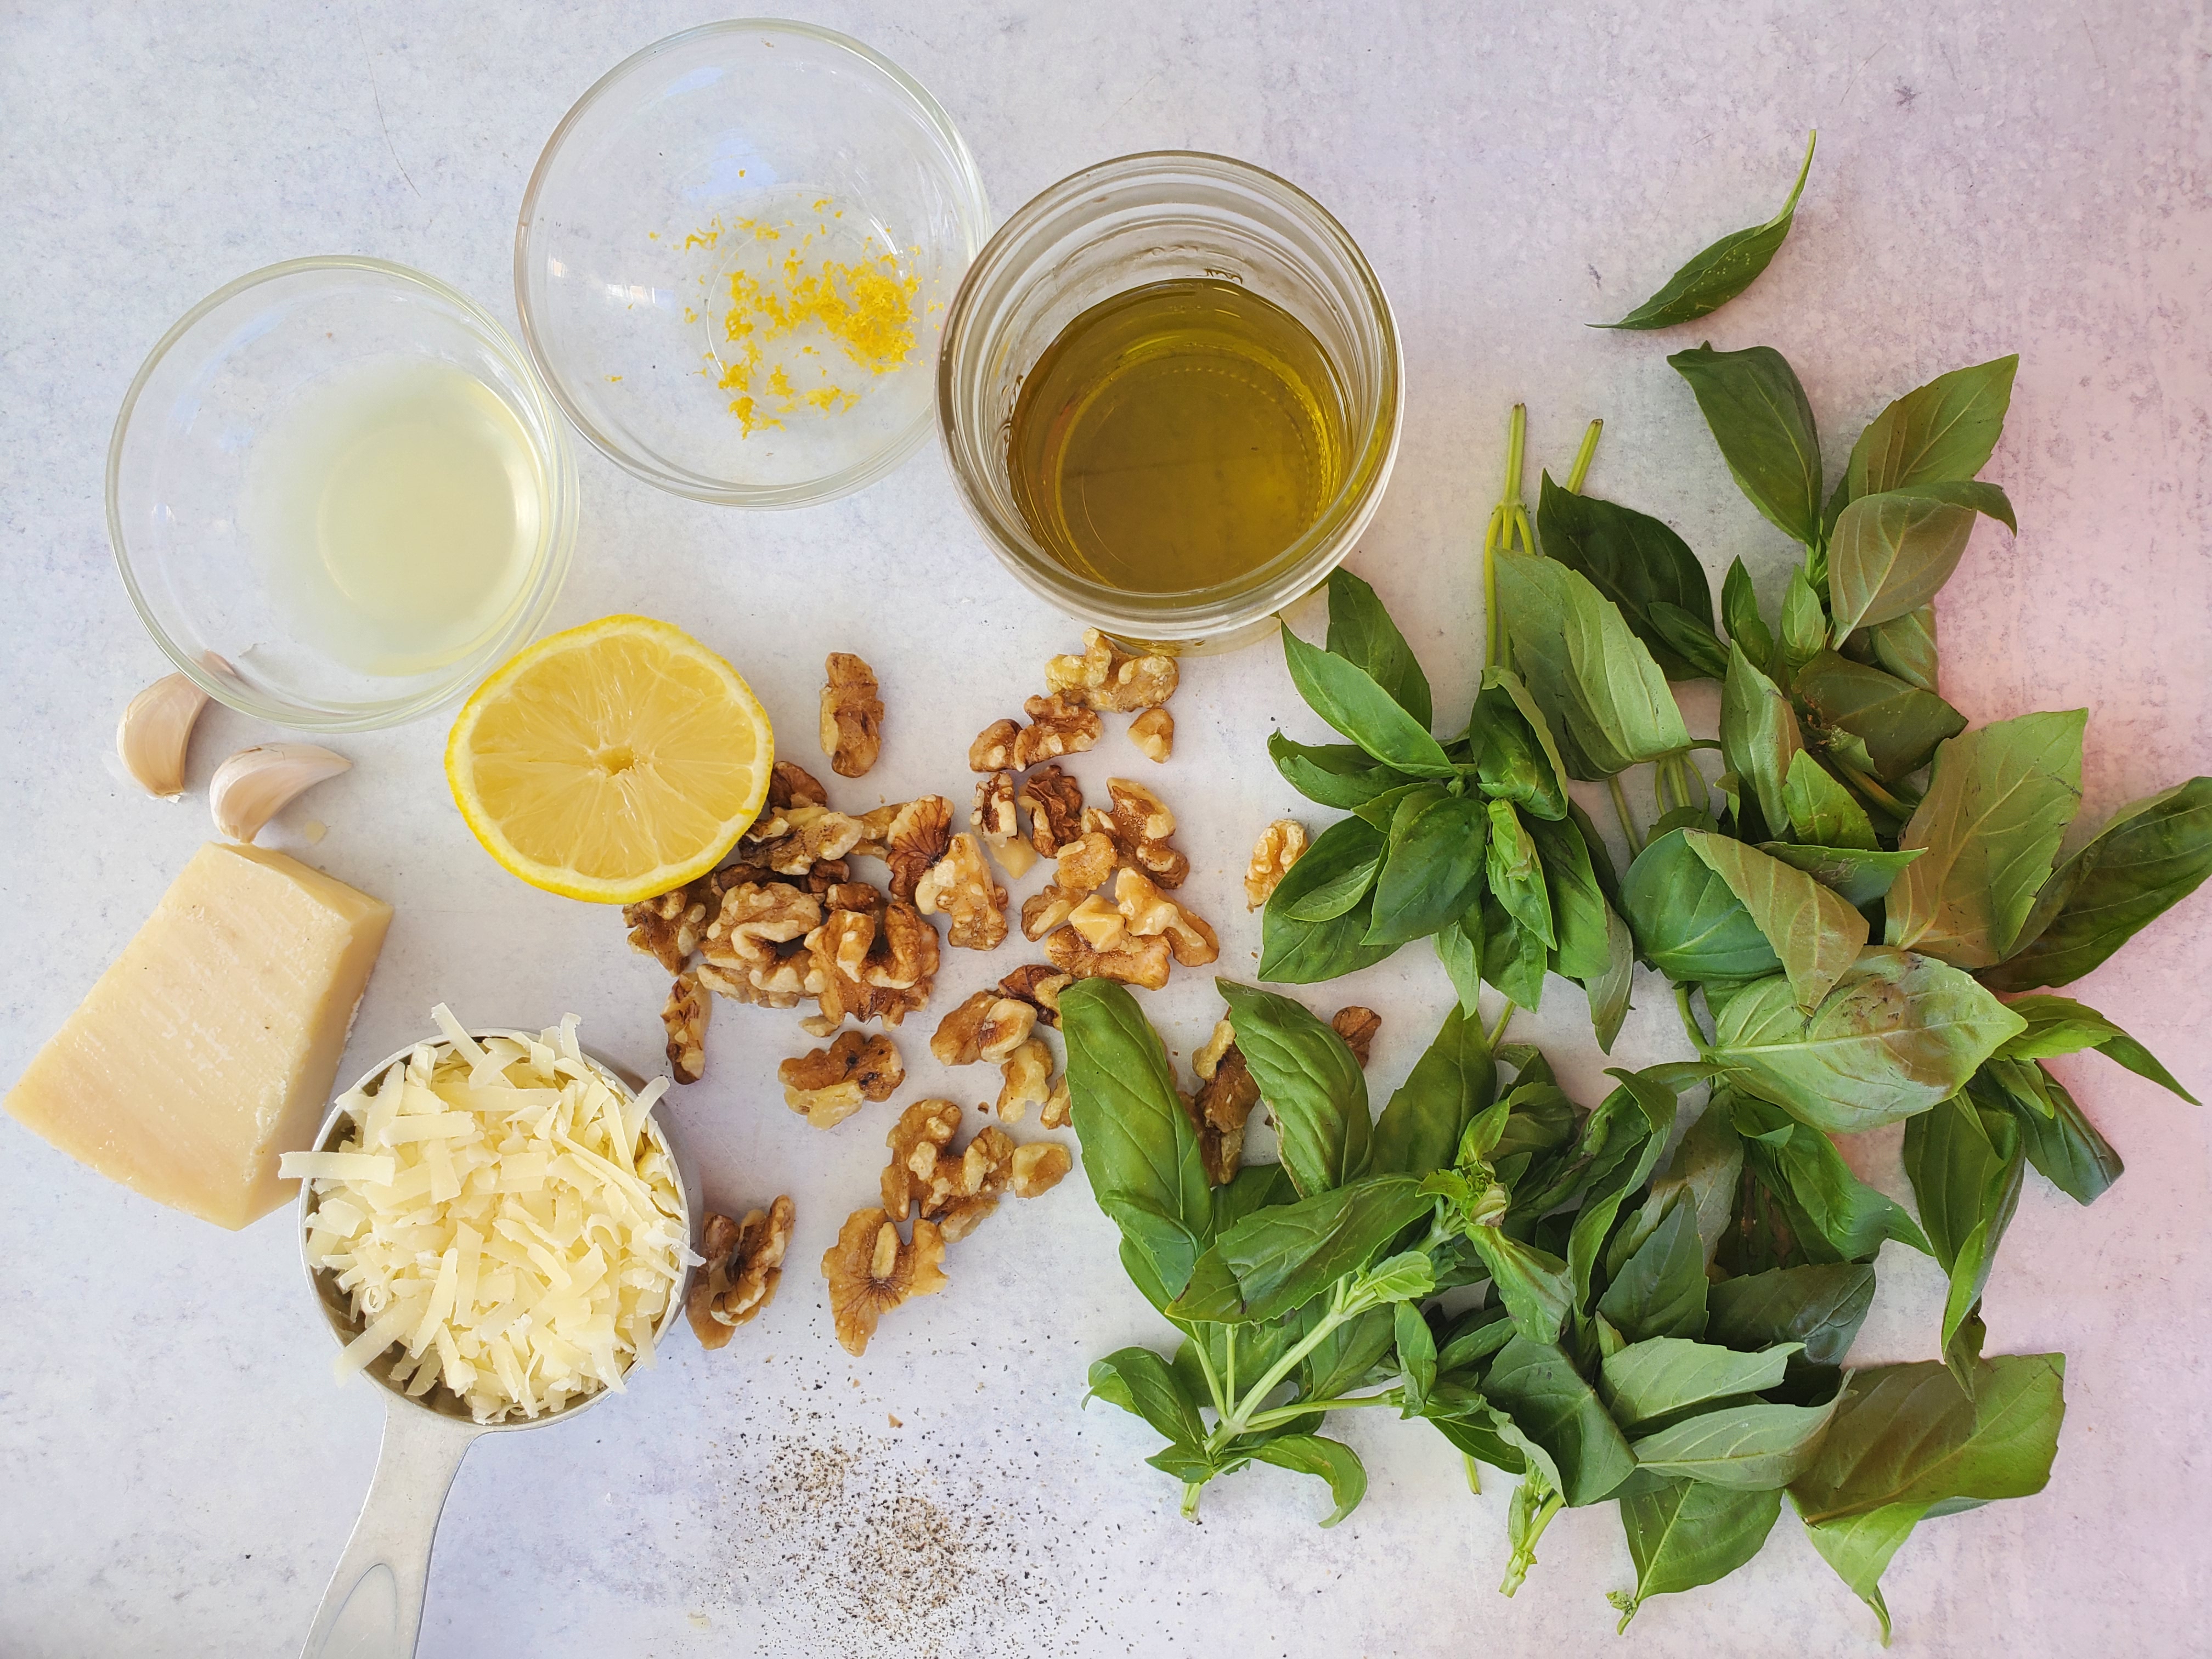 ingredients spread out for pesto - basil, olive oil, lemon, walnuts, garlic, parmesan cheese